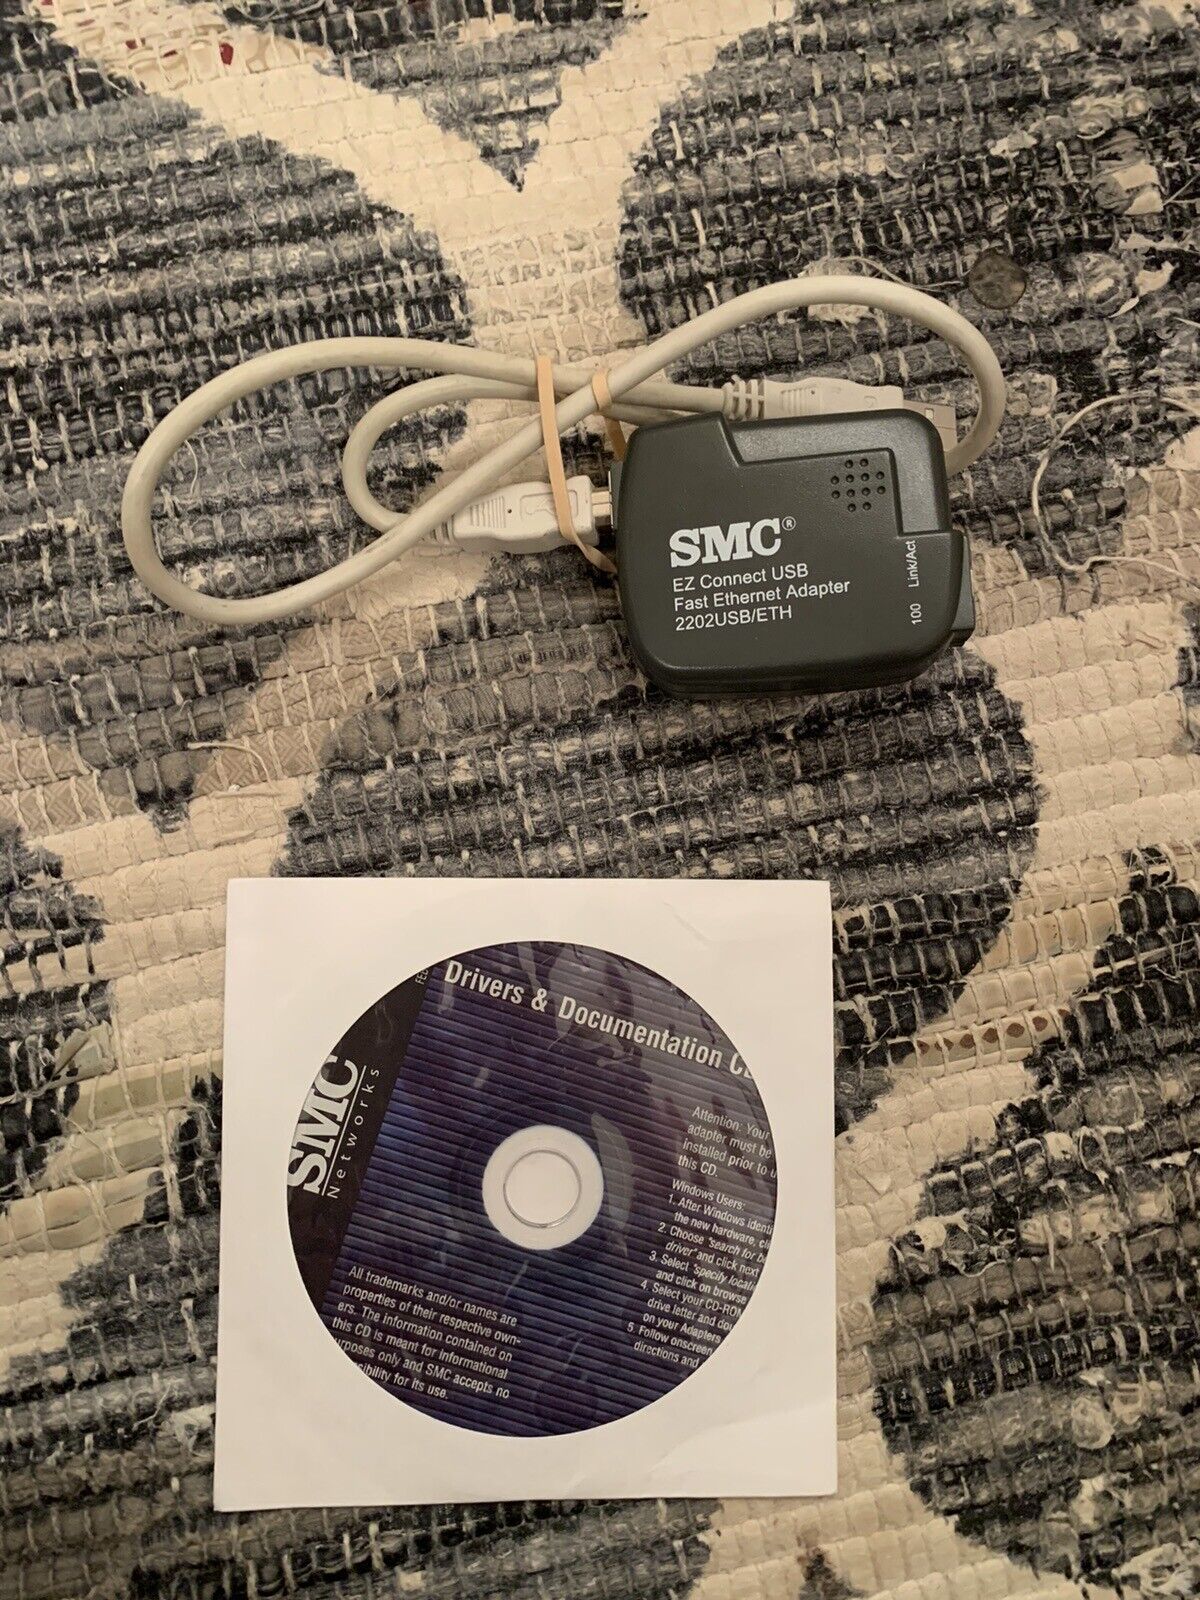 SMC Networks EZ Connect USB 10/100 Fast Ethernet Adapter + Drivers & Document CD